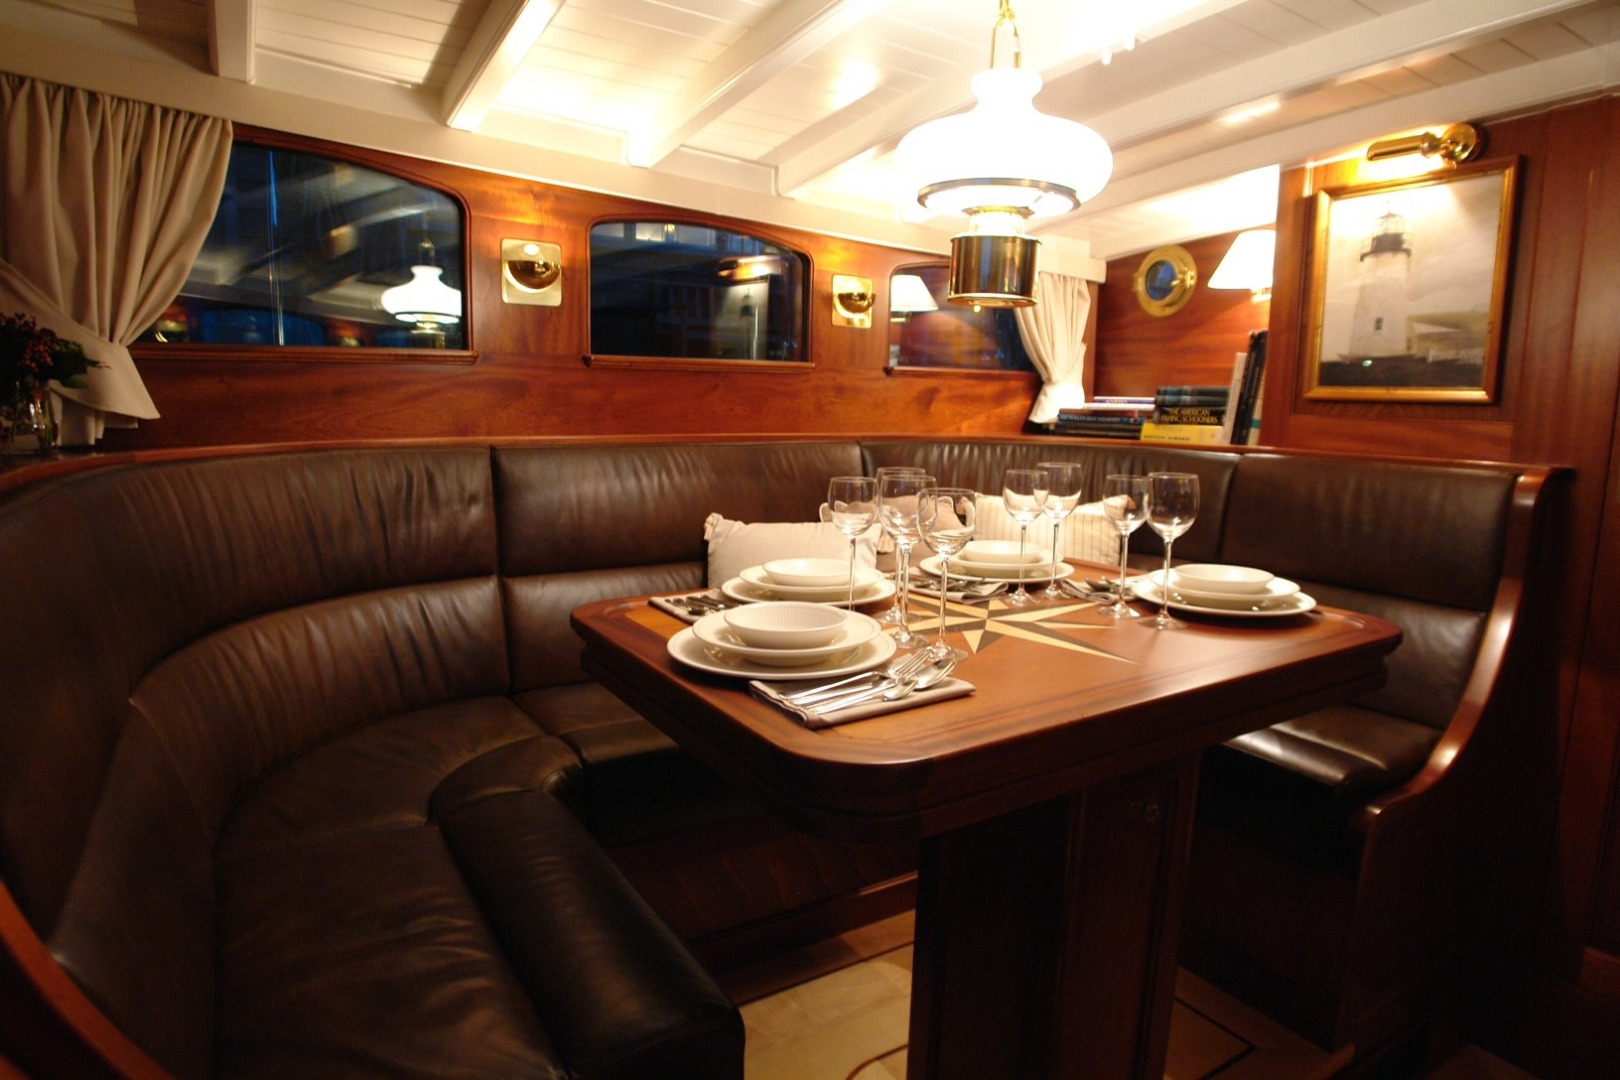 This is the main interior saloon of the classic cruising yacht, ‘Ahoy’. With a rich and warm mahogany panelled interior, maple flooring and plush leather soft furnishings, this schooner exudes comfort and is perfect for blue water and offshore cruising. 